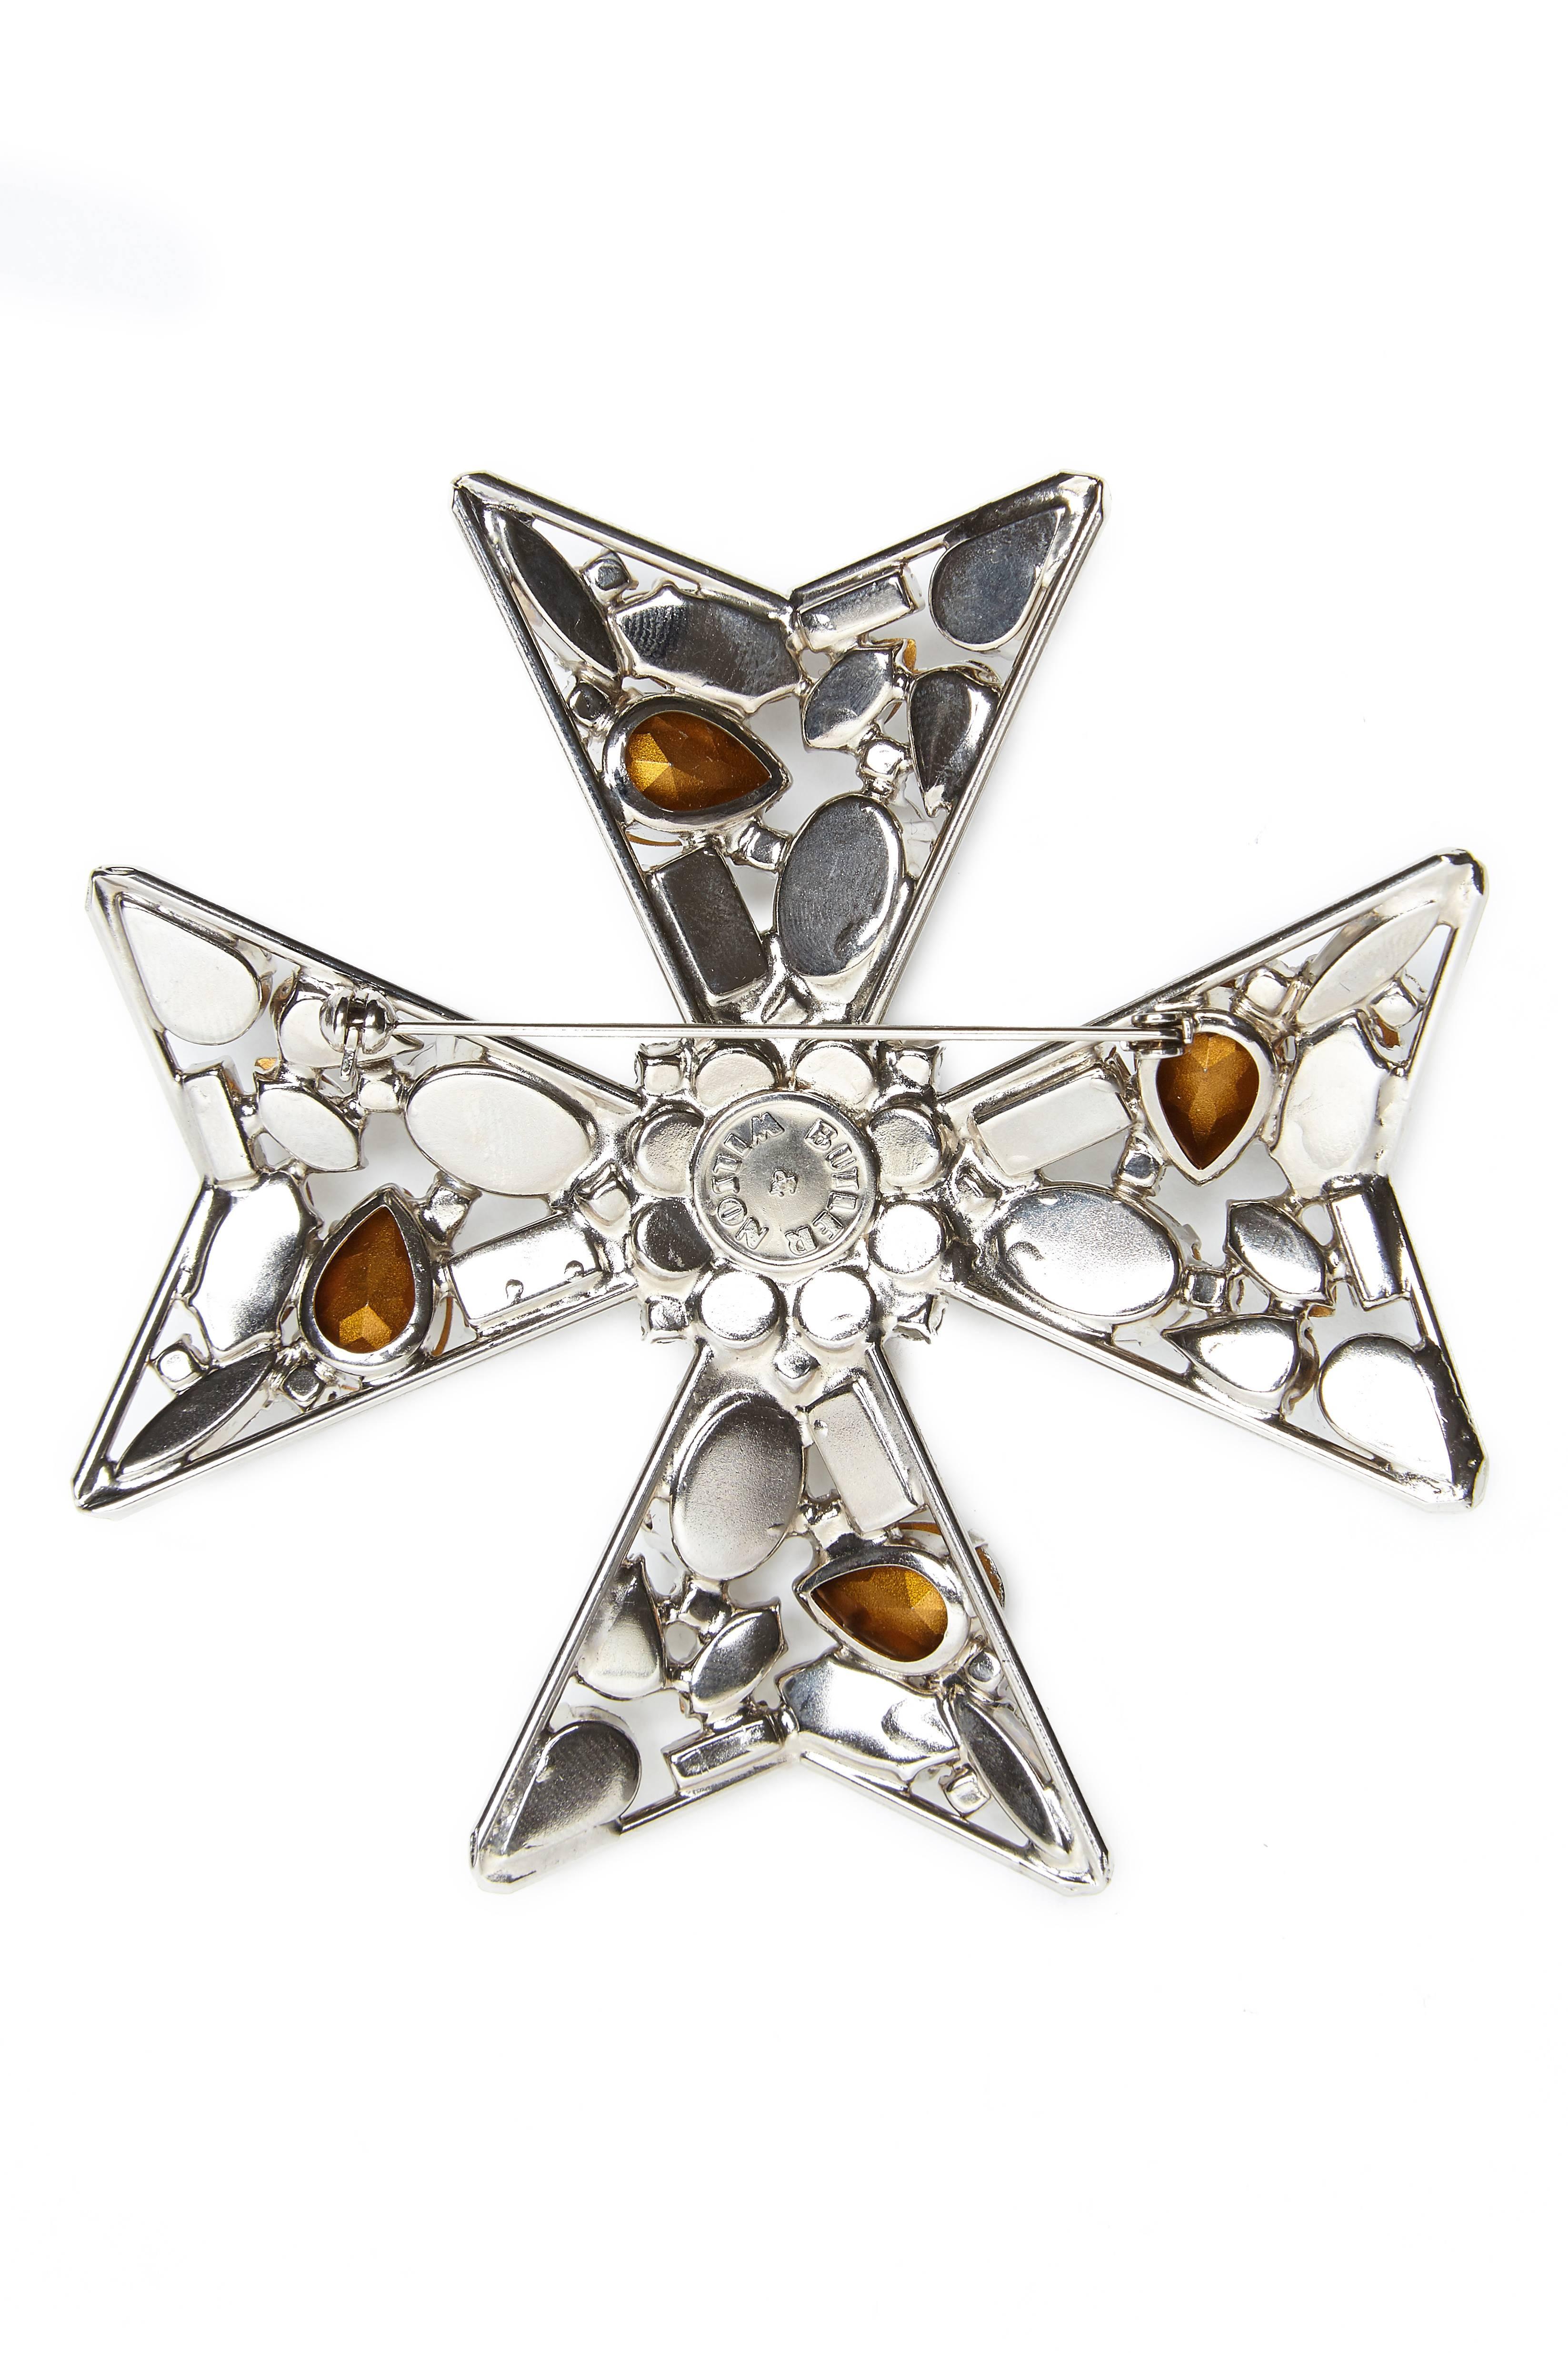 1980s Butler and Wilson giant Swarovski diamond maltese cross brooch.  This is an original, collectable and early design that is entirely prong set with a variety of classic diamond shaped stones and has a thick silver-tone plating.  This